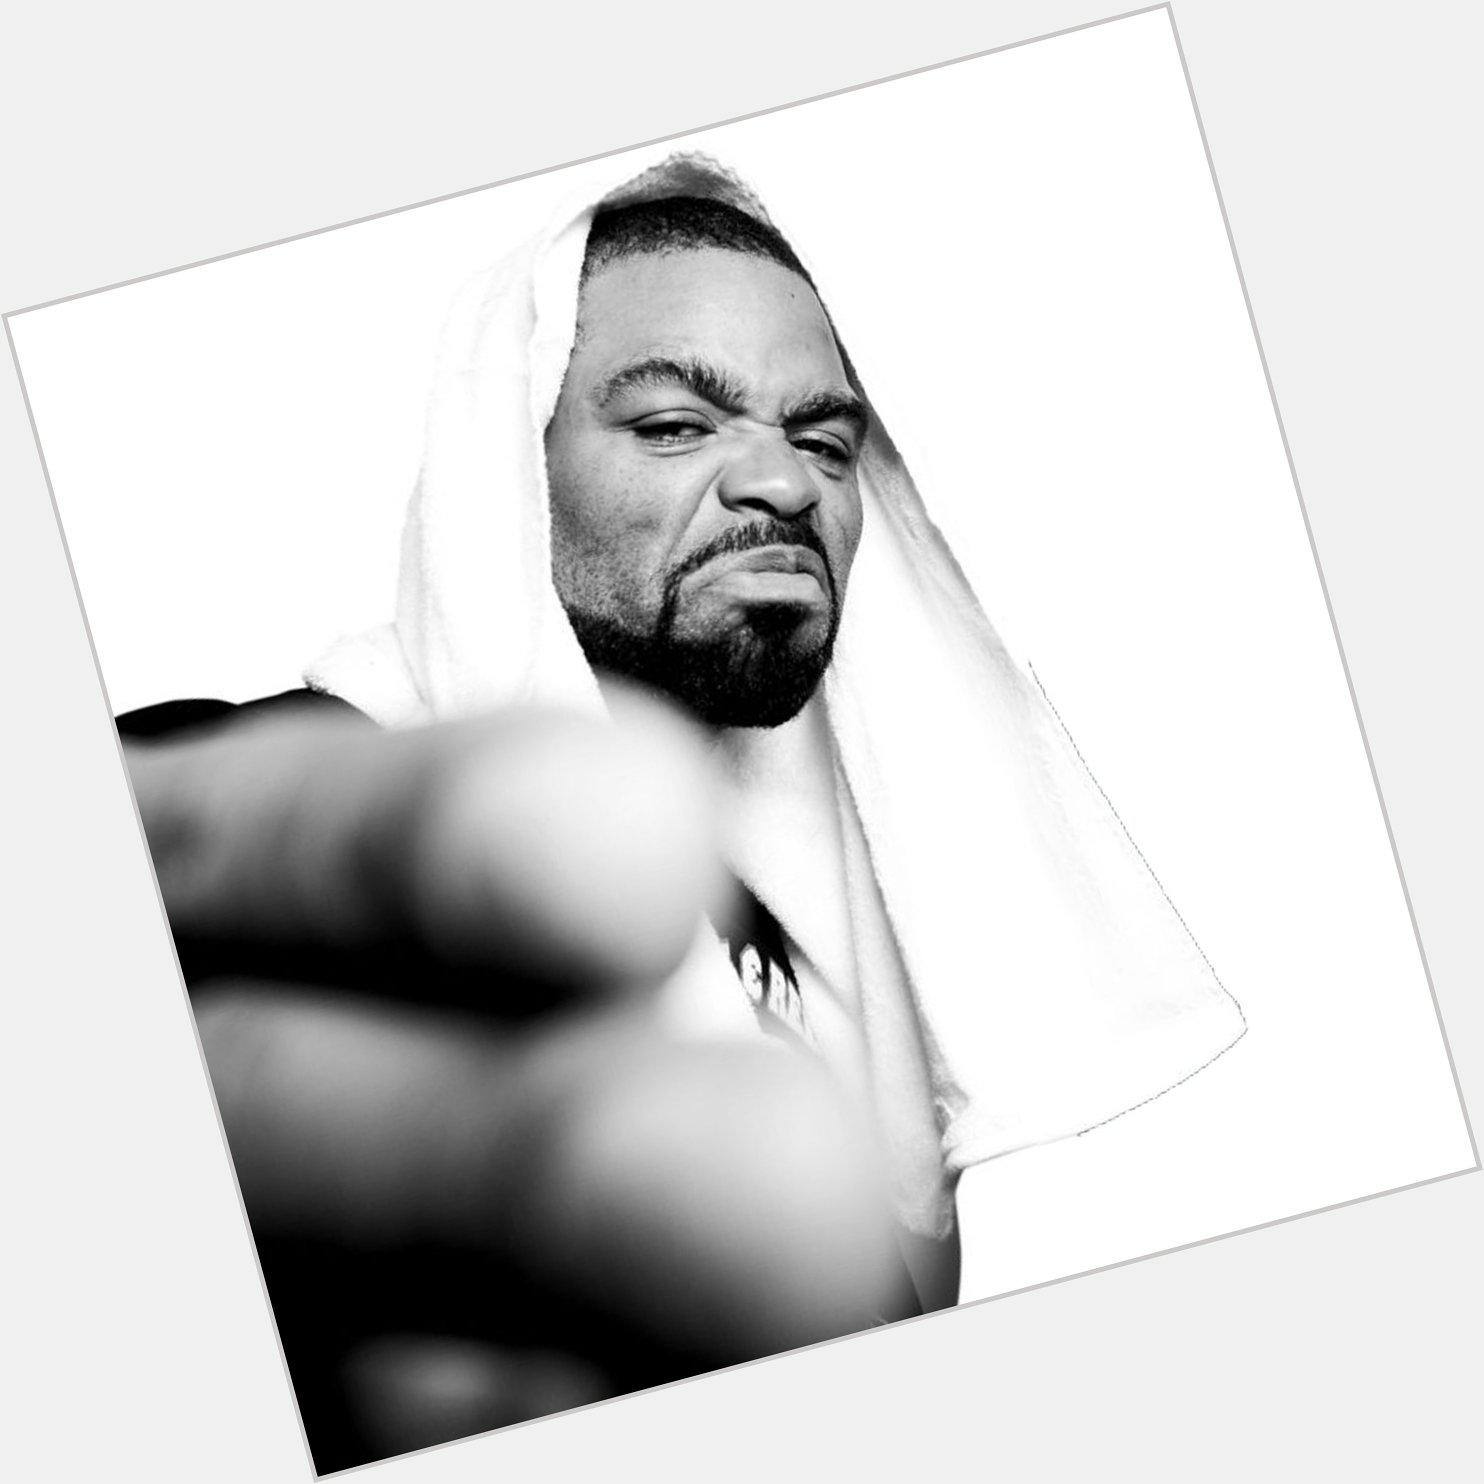 Happy 50th Birthday Method Man!

Check out our profile on him ->  